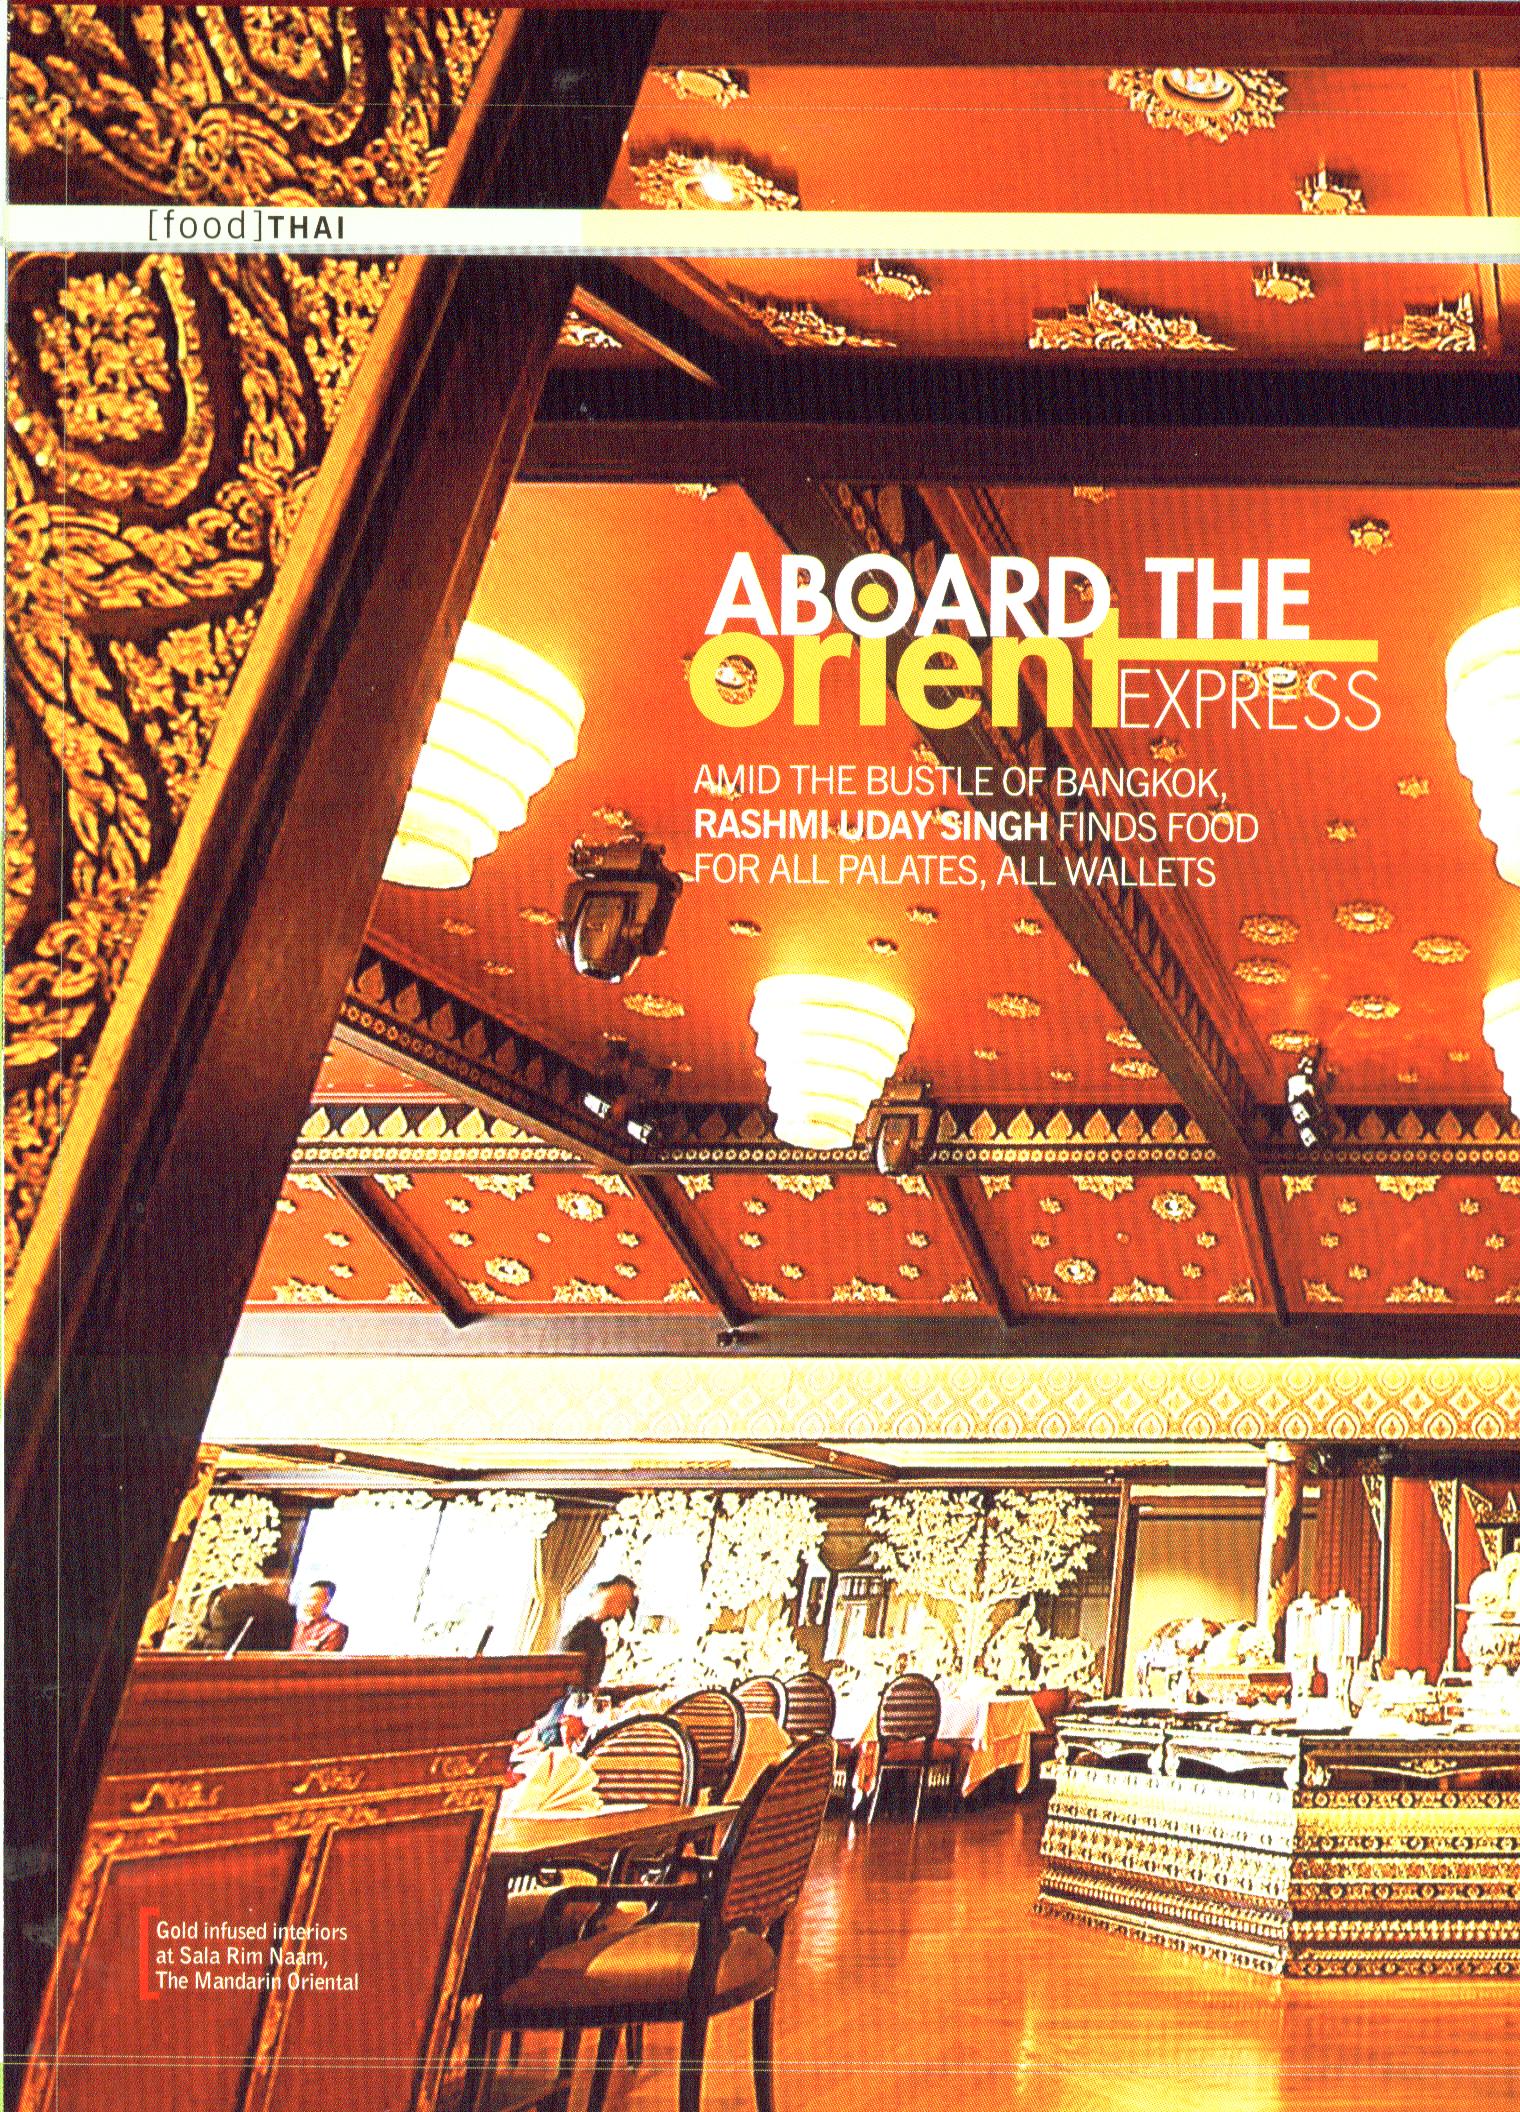 A BOARD THE ORIENT EXPRESS THAILAND